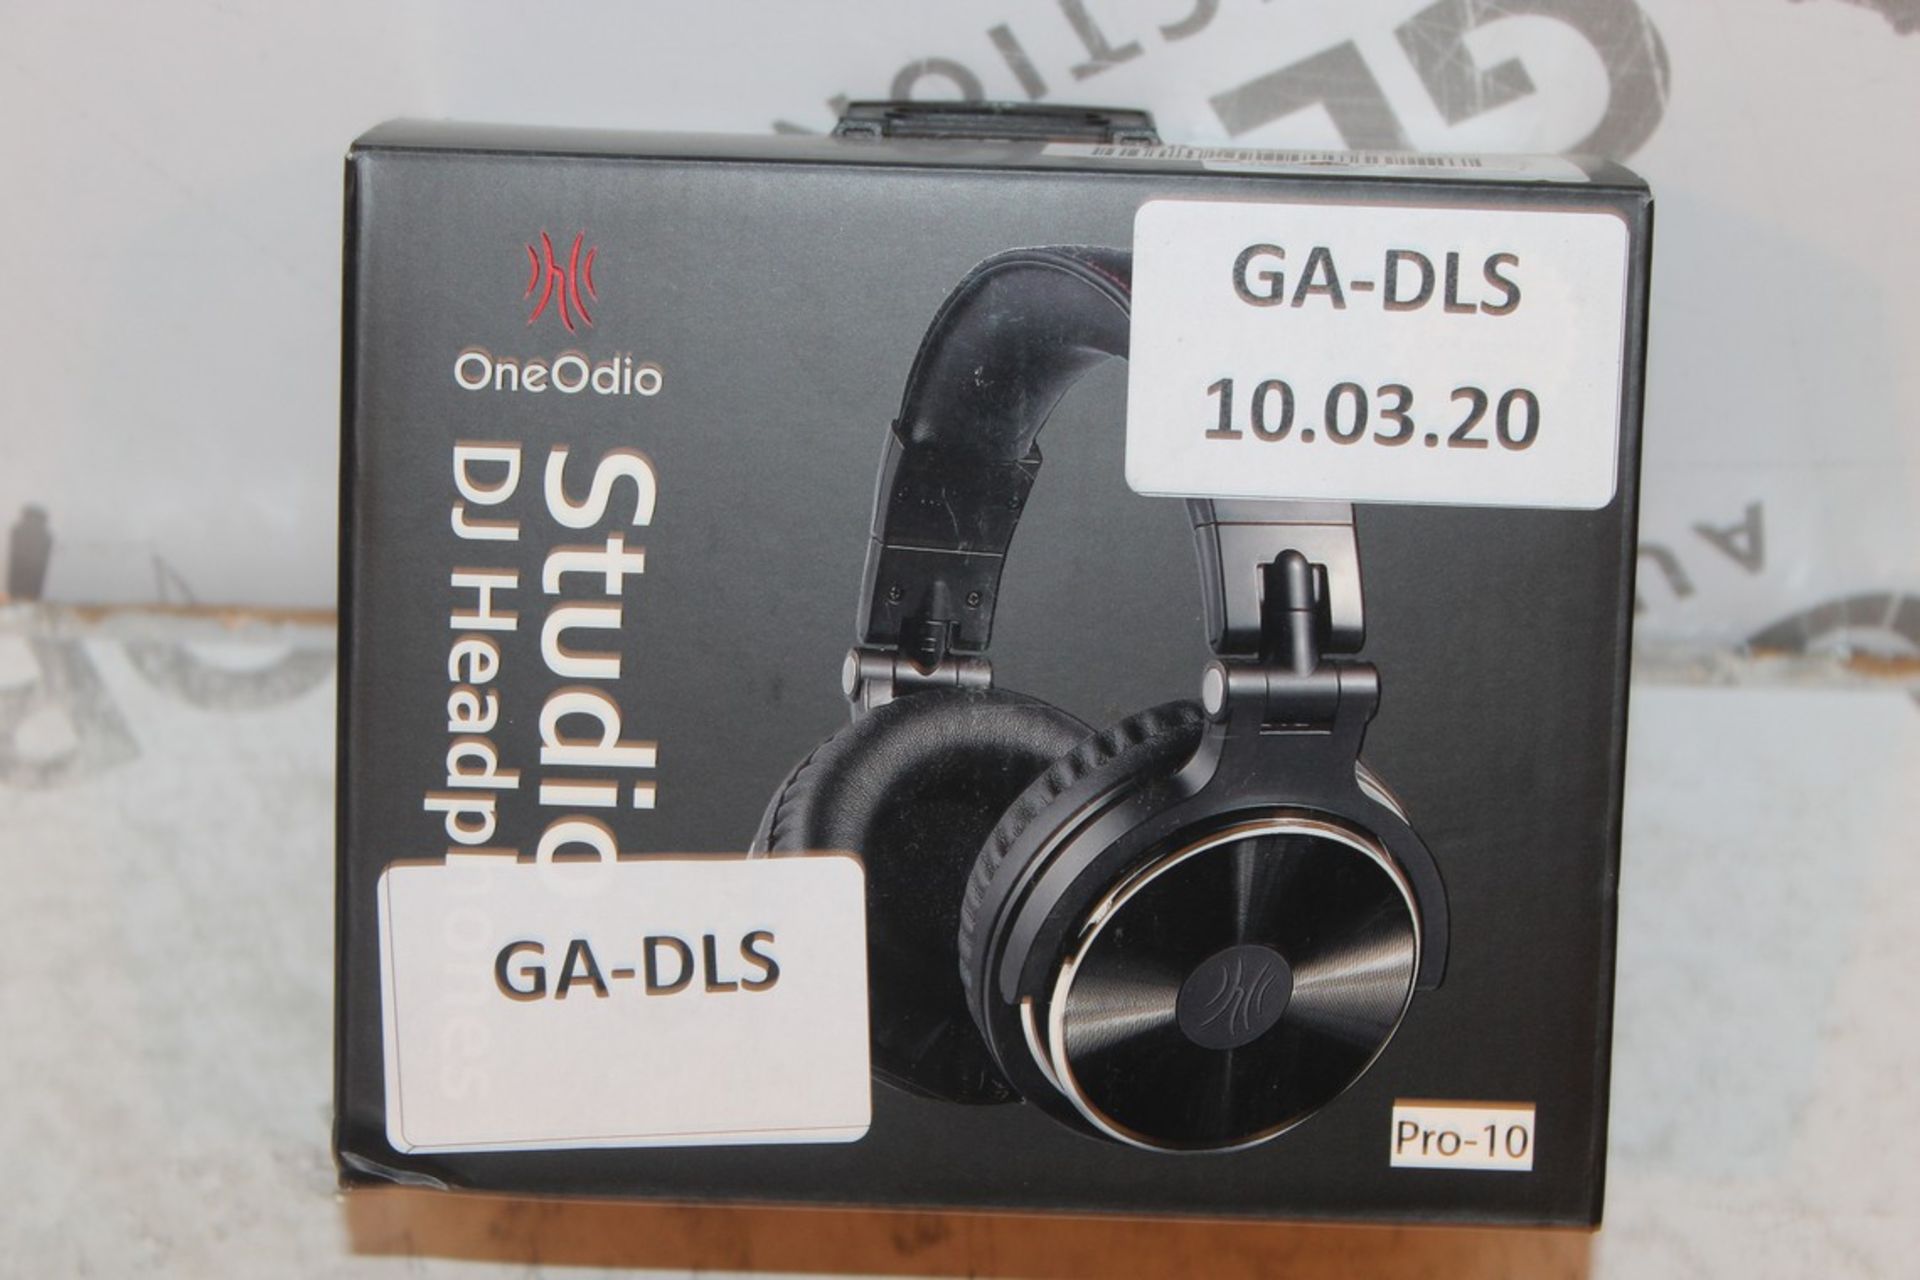 Lot To Contain 2 Pairs Of One Odio Pro 10 Wireless Headphones Combined RRP £100 (Appraisals